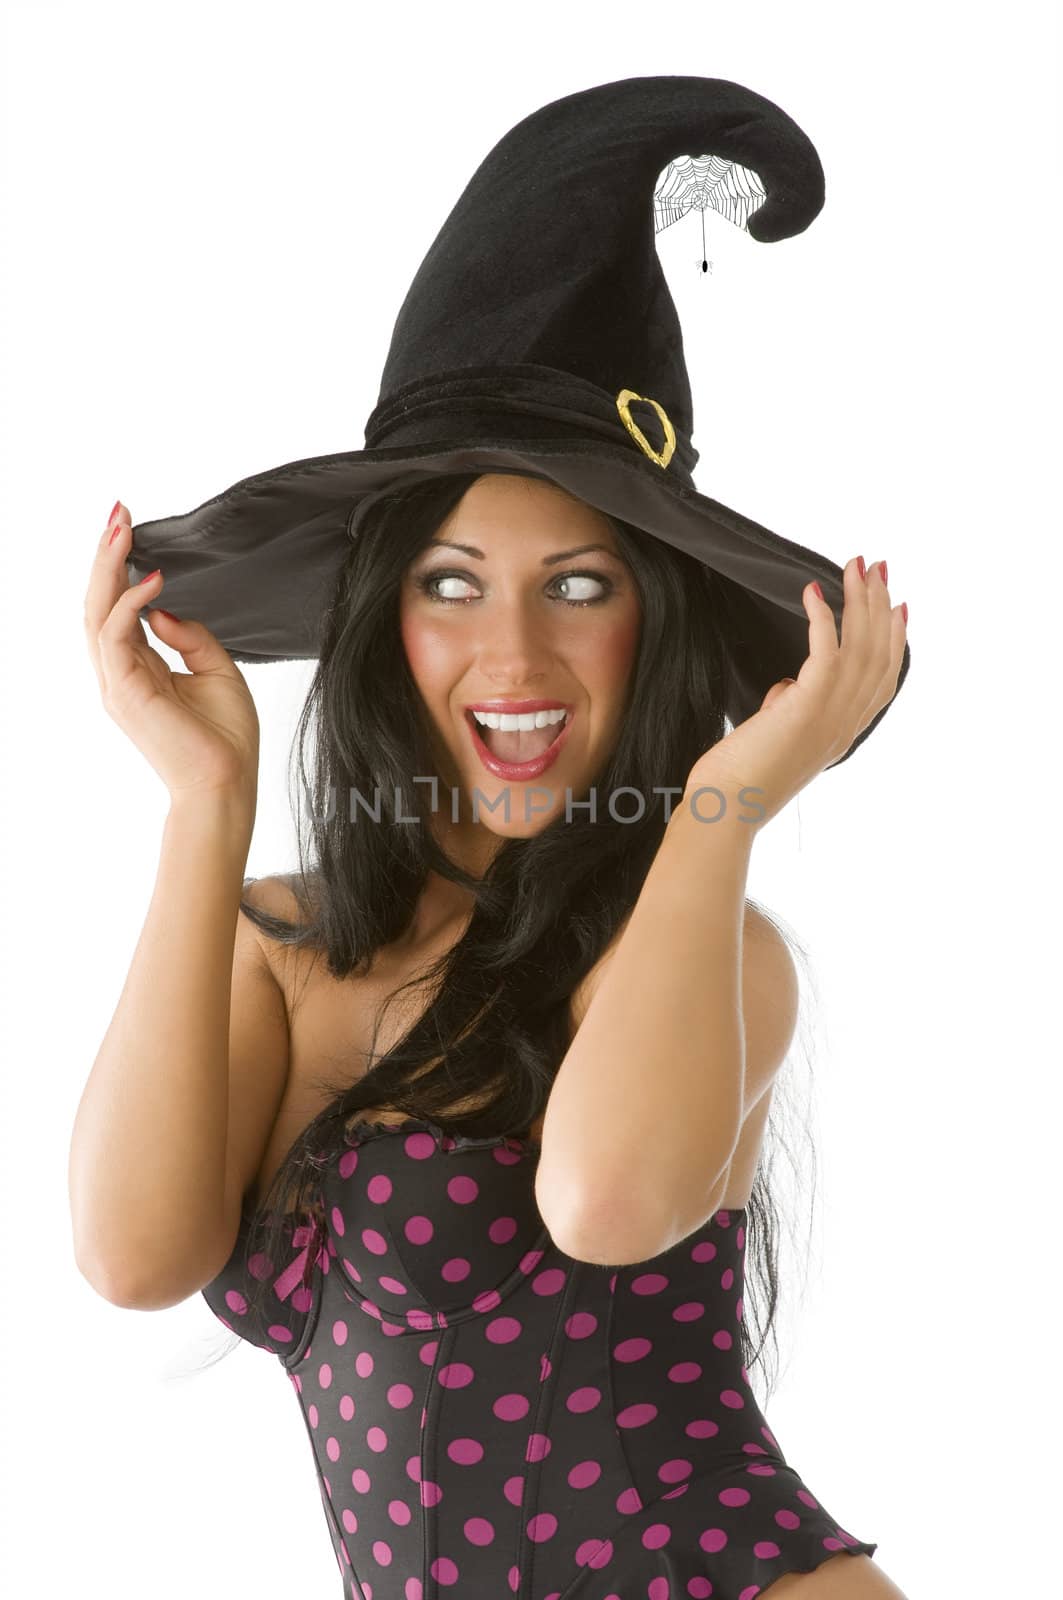 blue eyes witch hat by fotoCD